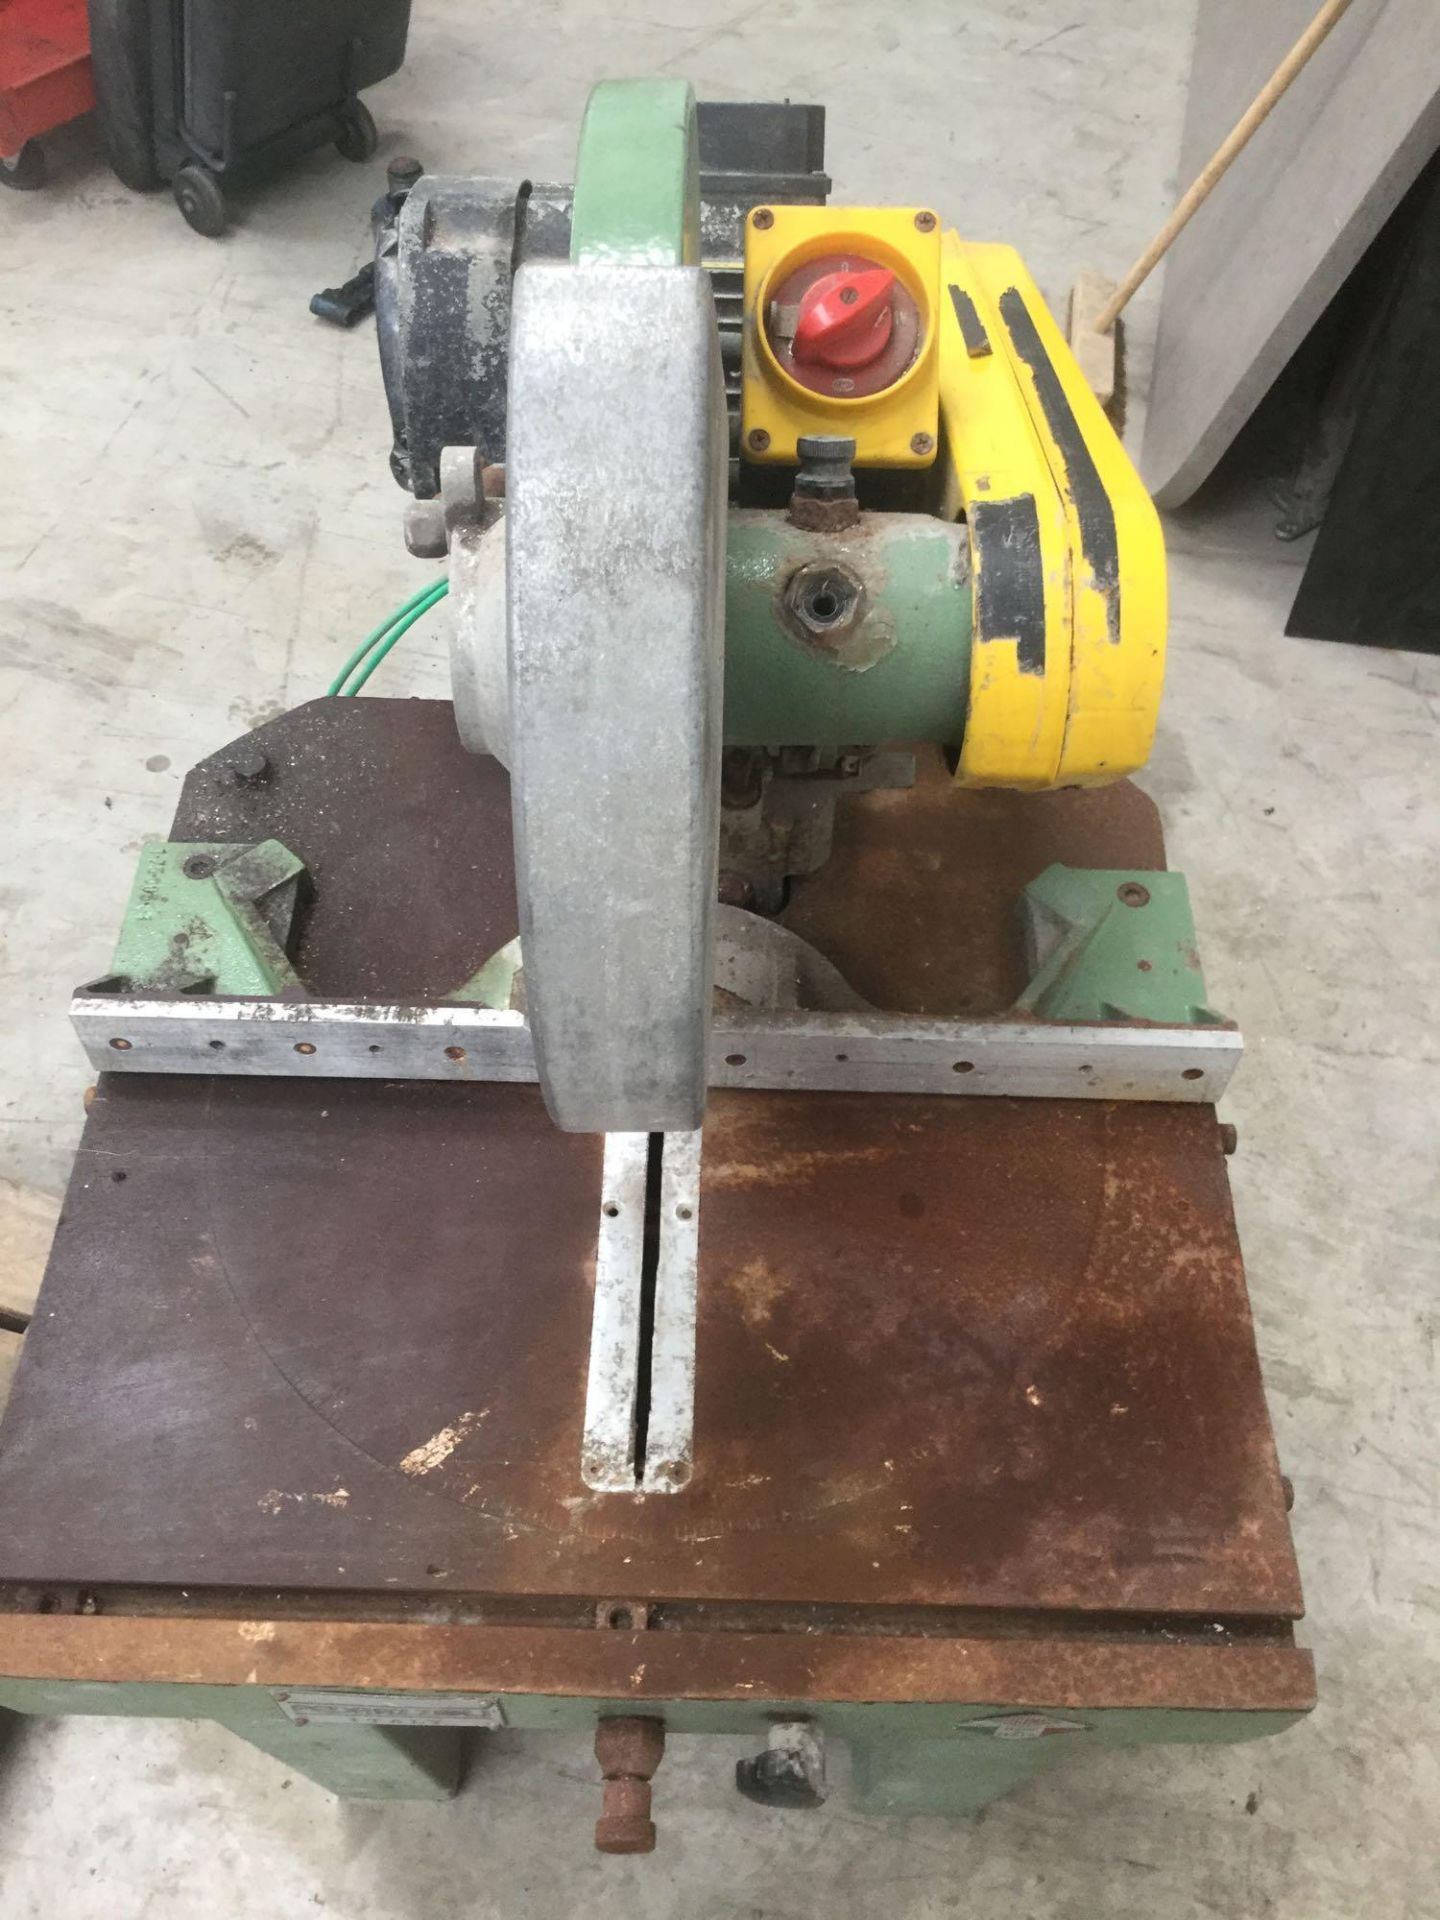 Perris 350 cold saw - Image 2 of 3